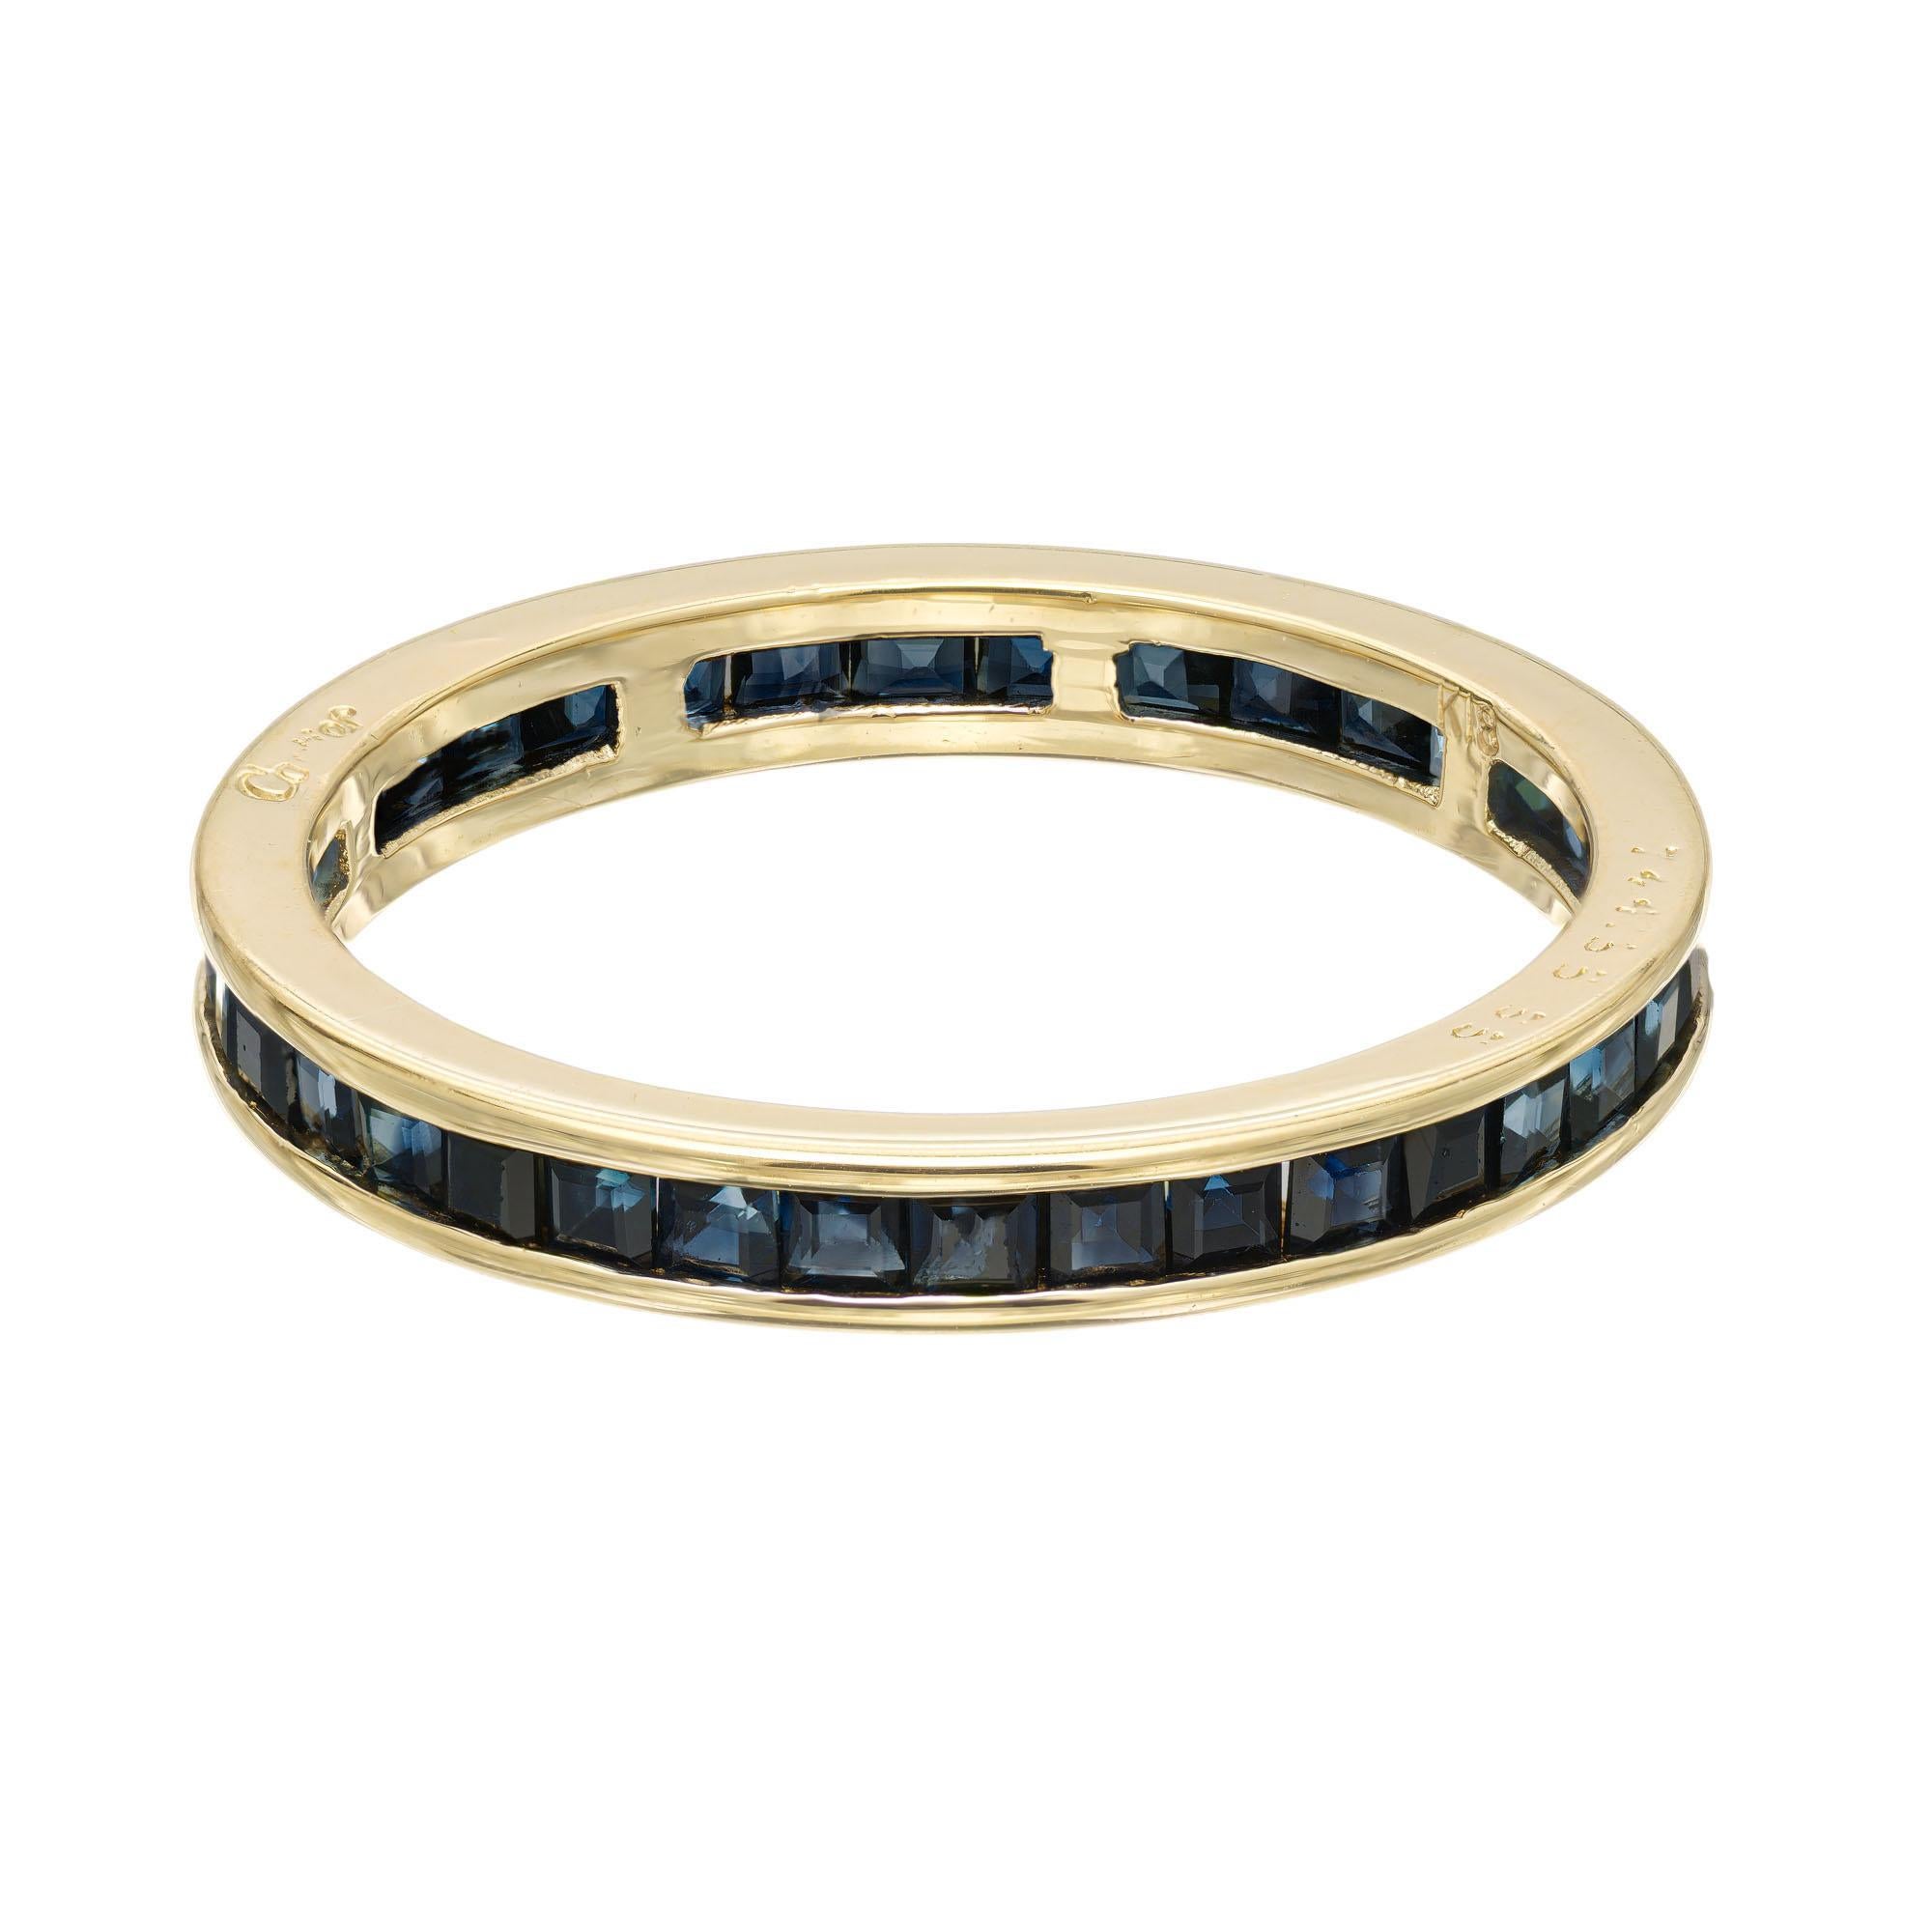 Cartier sapphire wedding band ring. 36 square channel set sapphires in a 18k yellow gold eternity setting. 

36 square cut sapphires approx. total weight. 1.10cts.
Size: 6.75
18k yellow gold
Weight: 2.5 grams
Stamped: Cartier